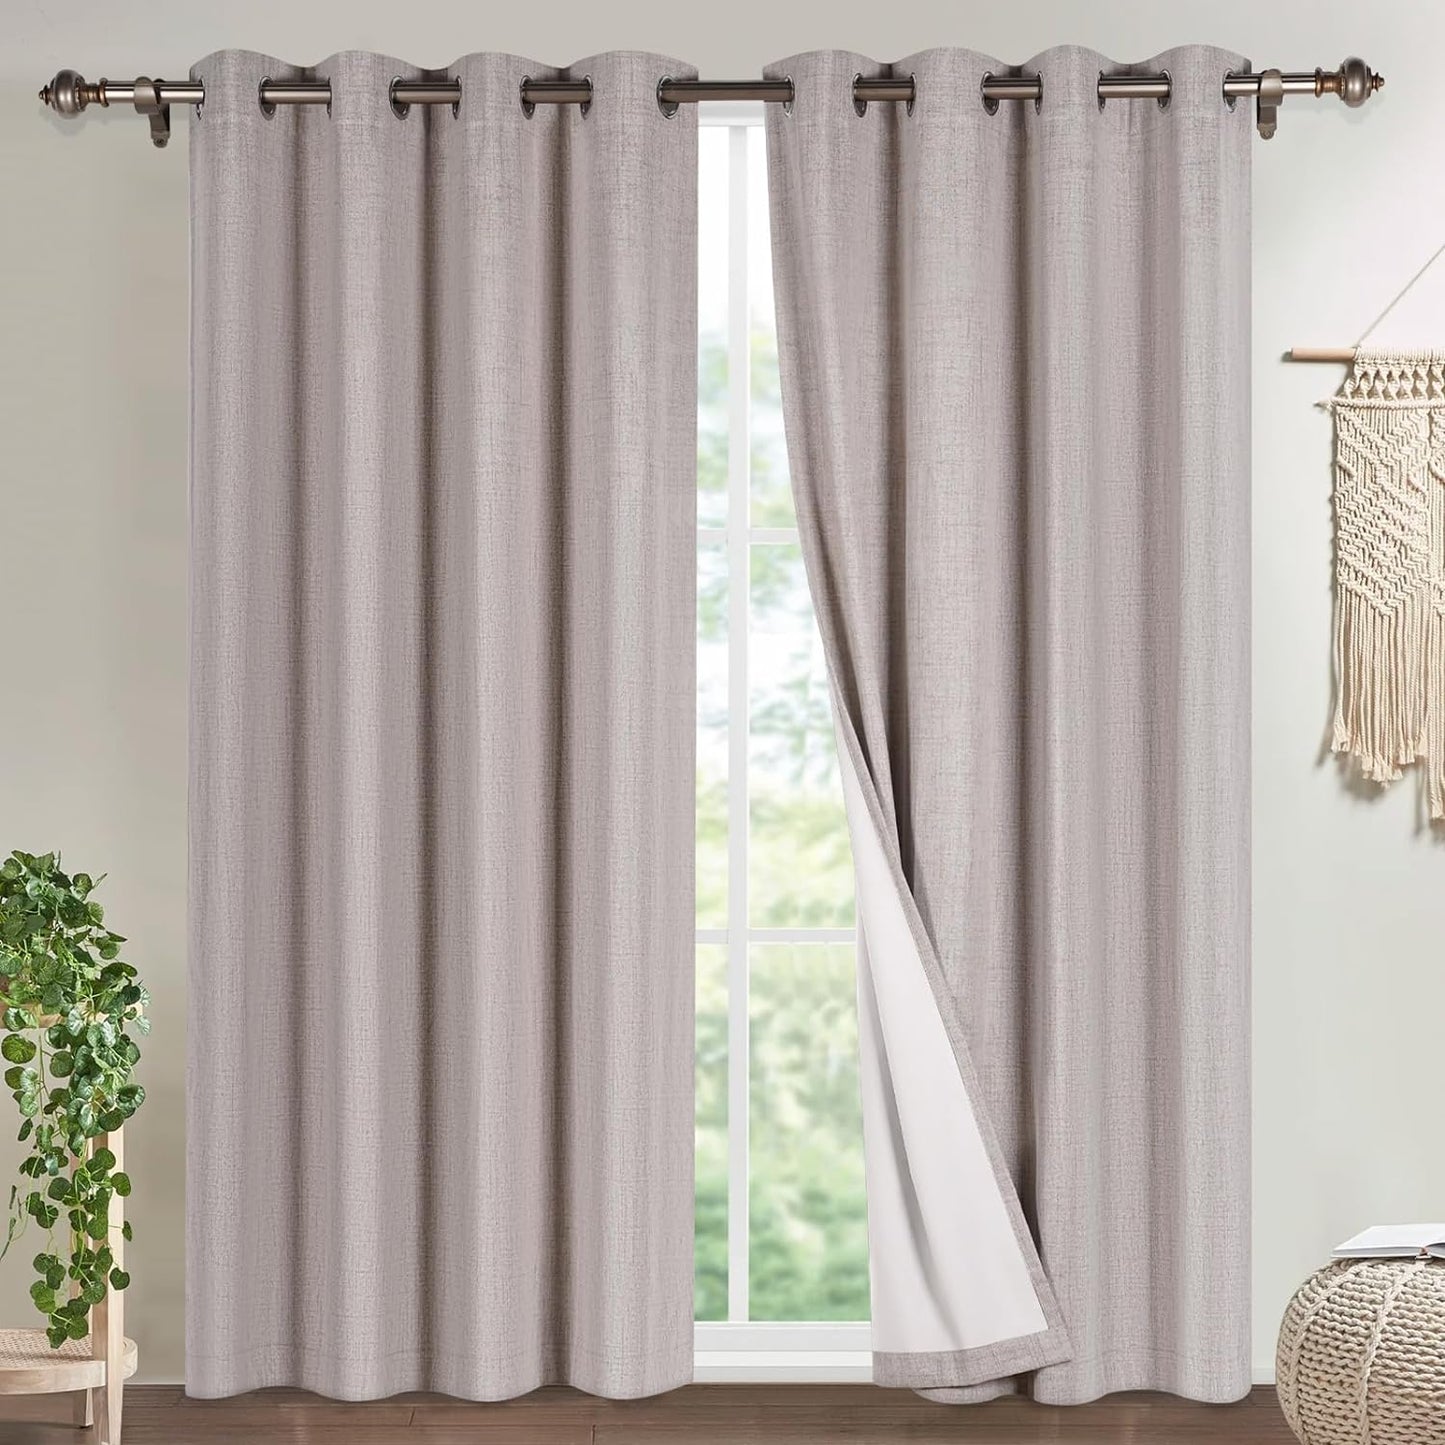 Timeles 100% Blackout Window Curtains 84 Inch Length for Living Room Textured Linen Curtains Sliver Grommet Pinch Pleated Room Darkening Curtain with White Liner/Ties(2 Panel W52 X L84, Ivory)  Timeles Natural W52" X L96" 